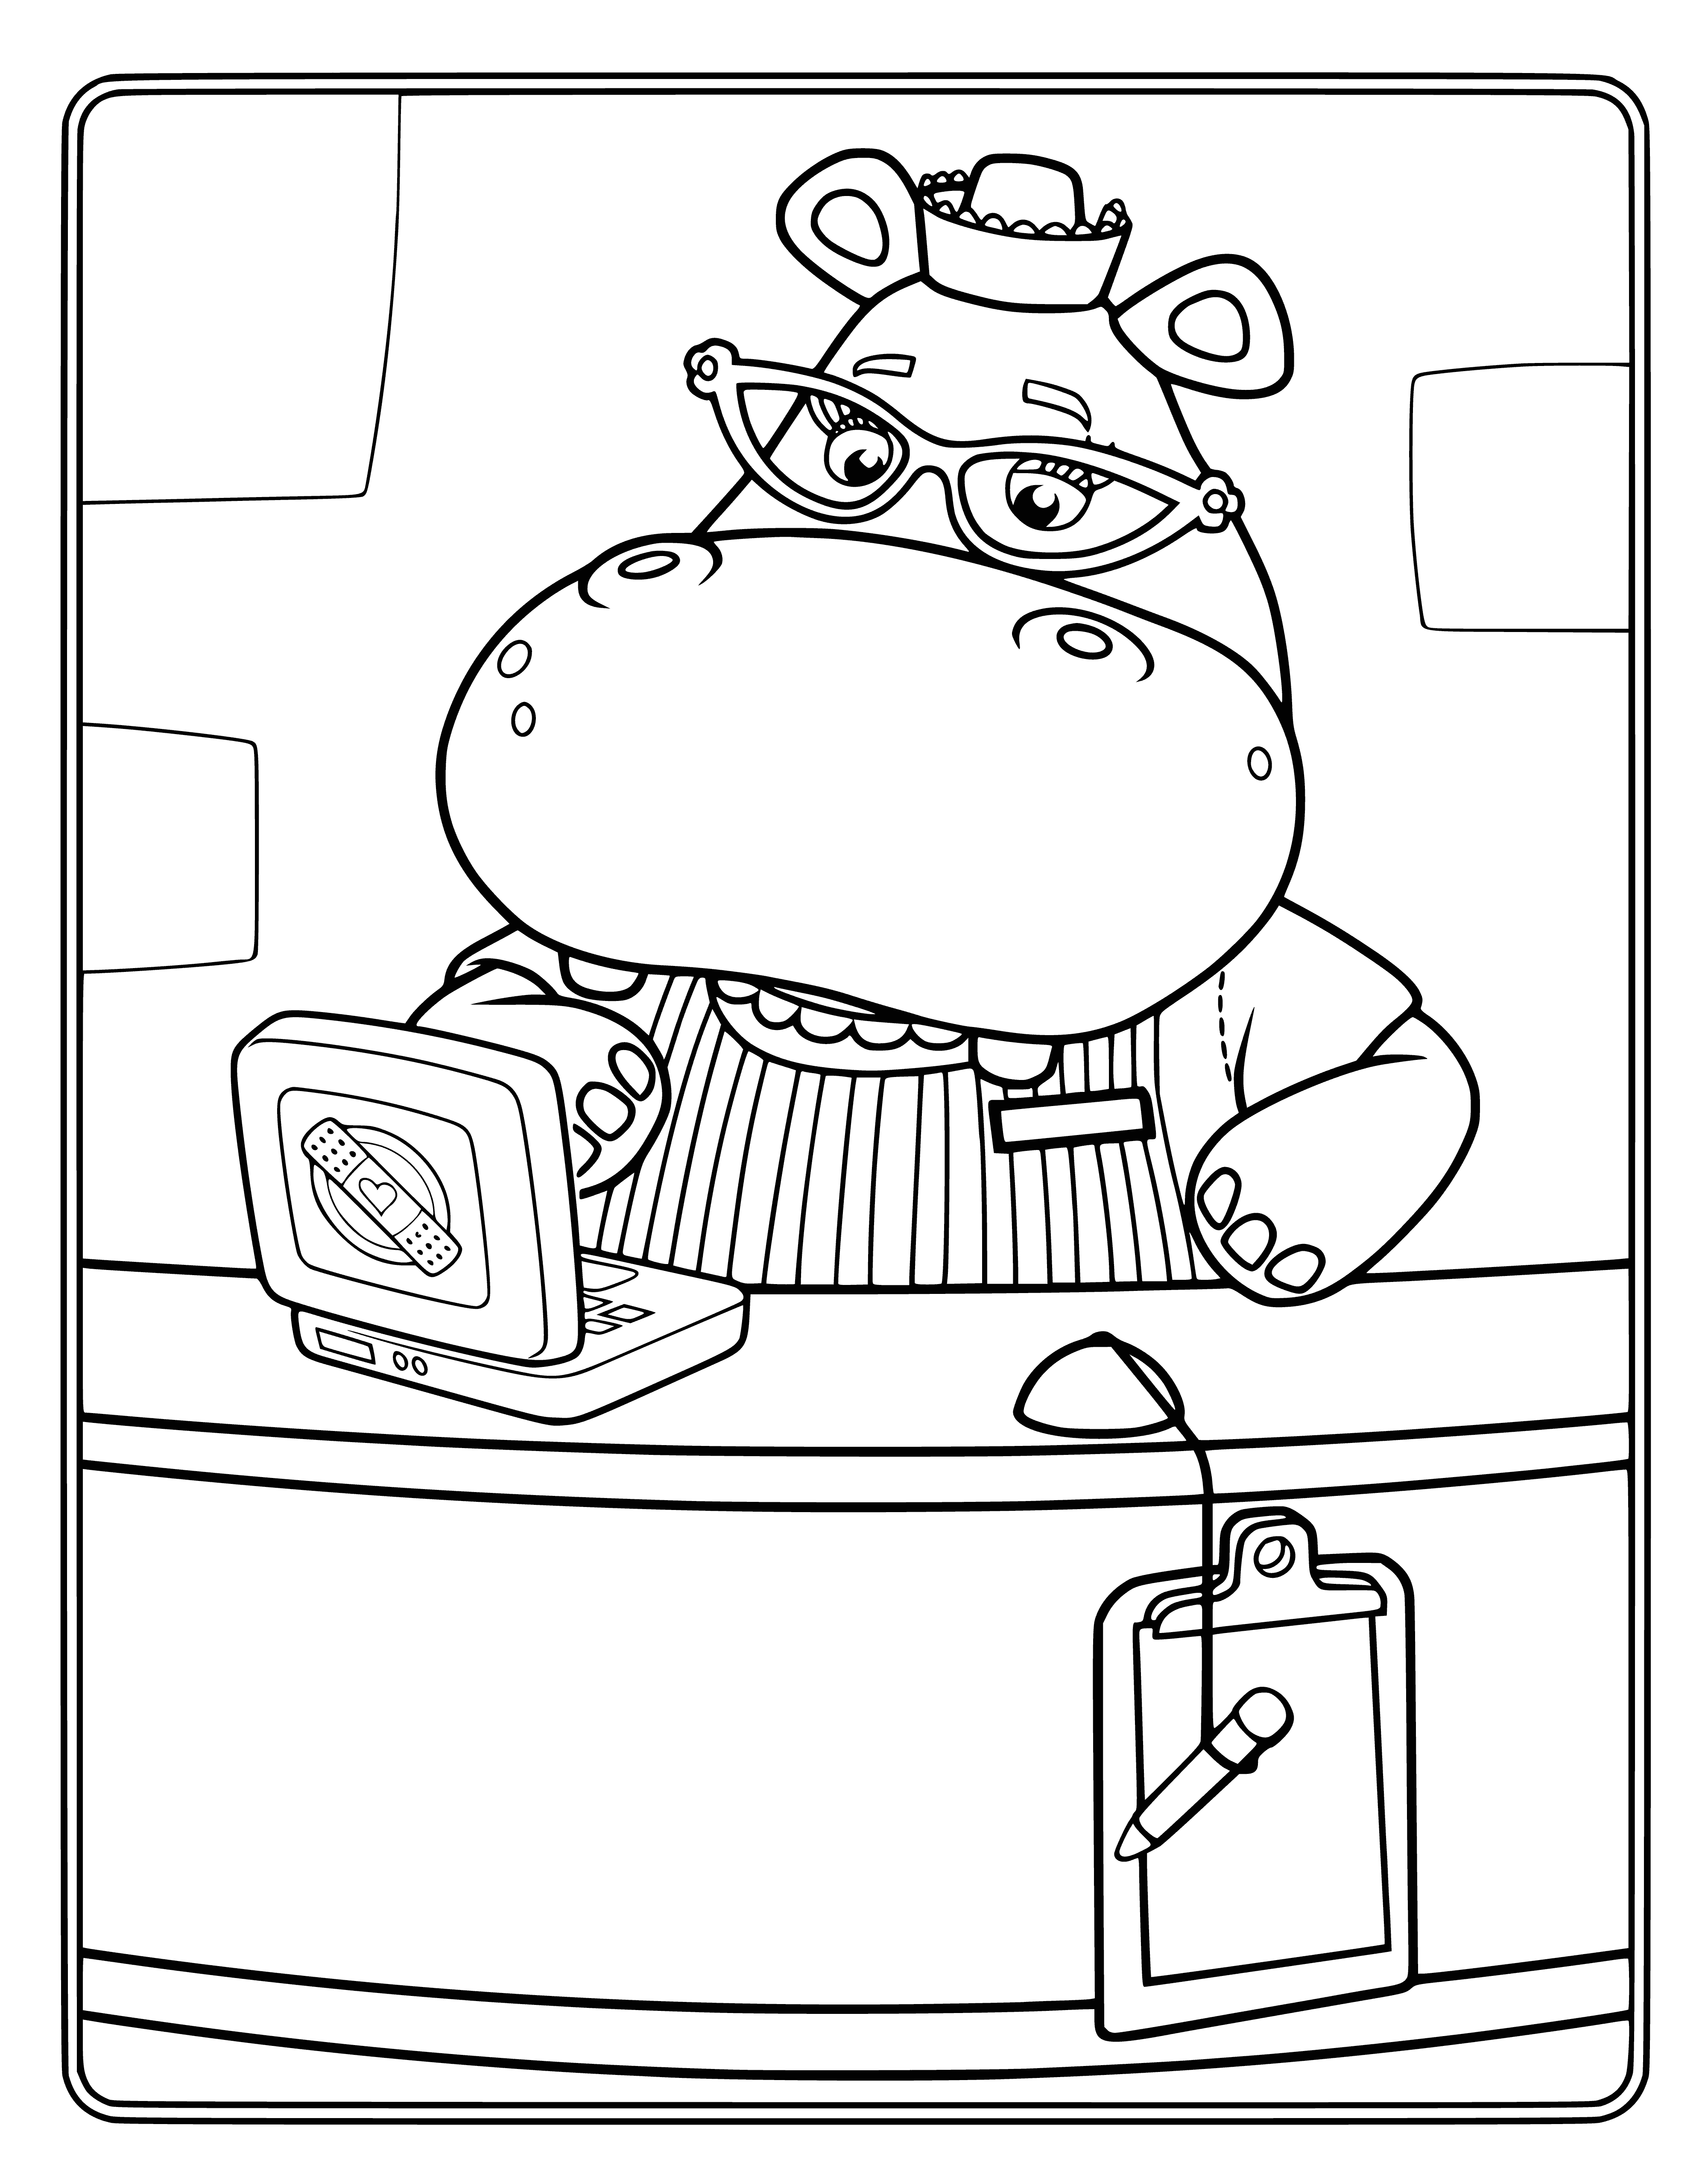 Hippo Hallie coloring page